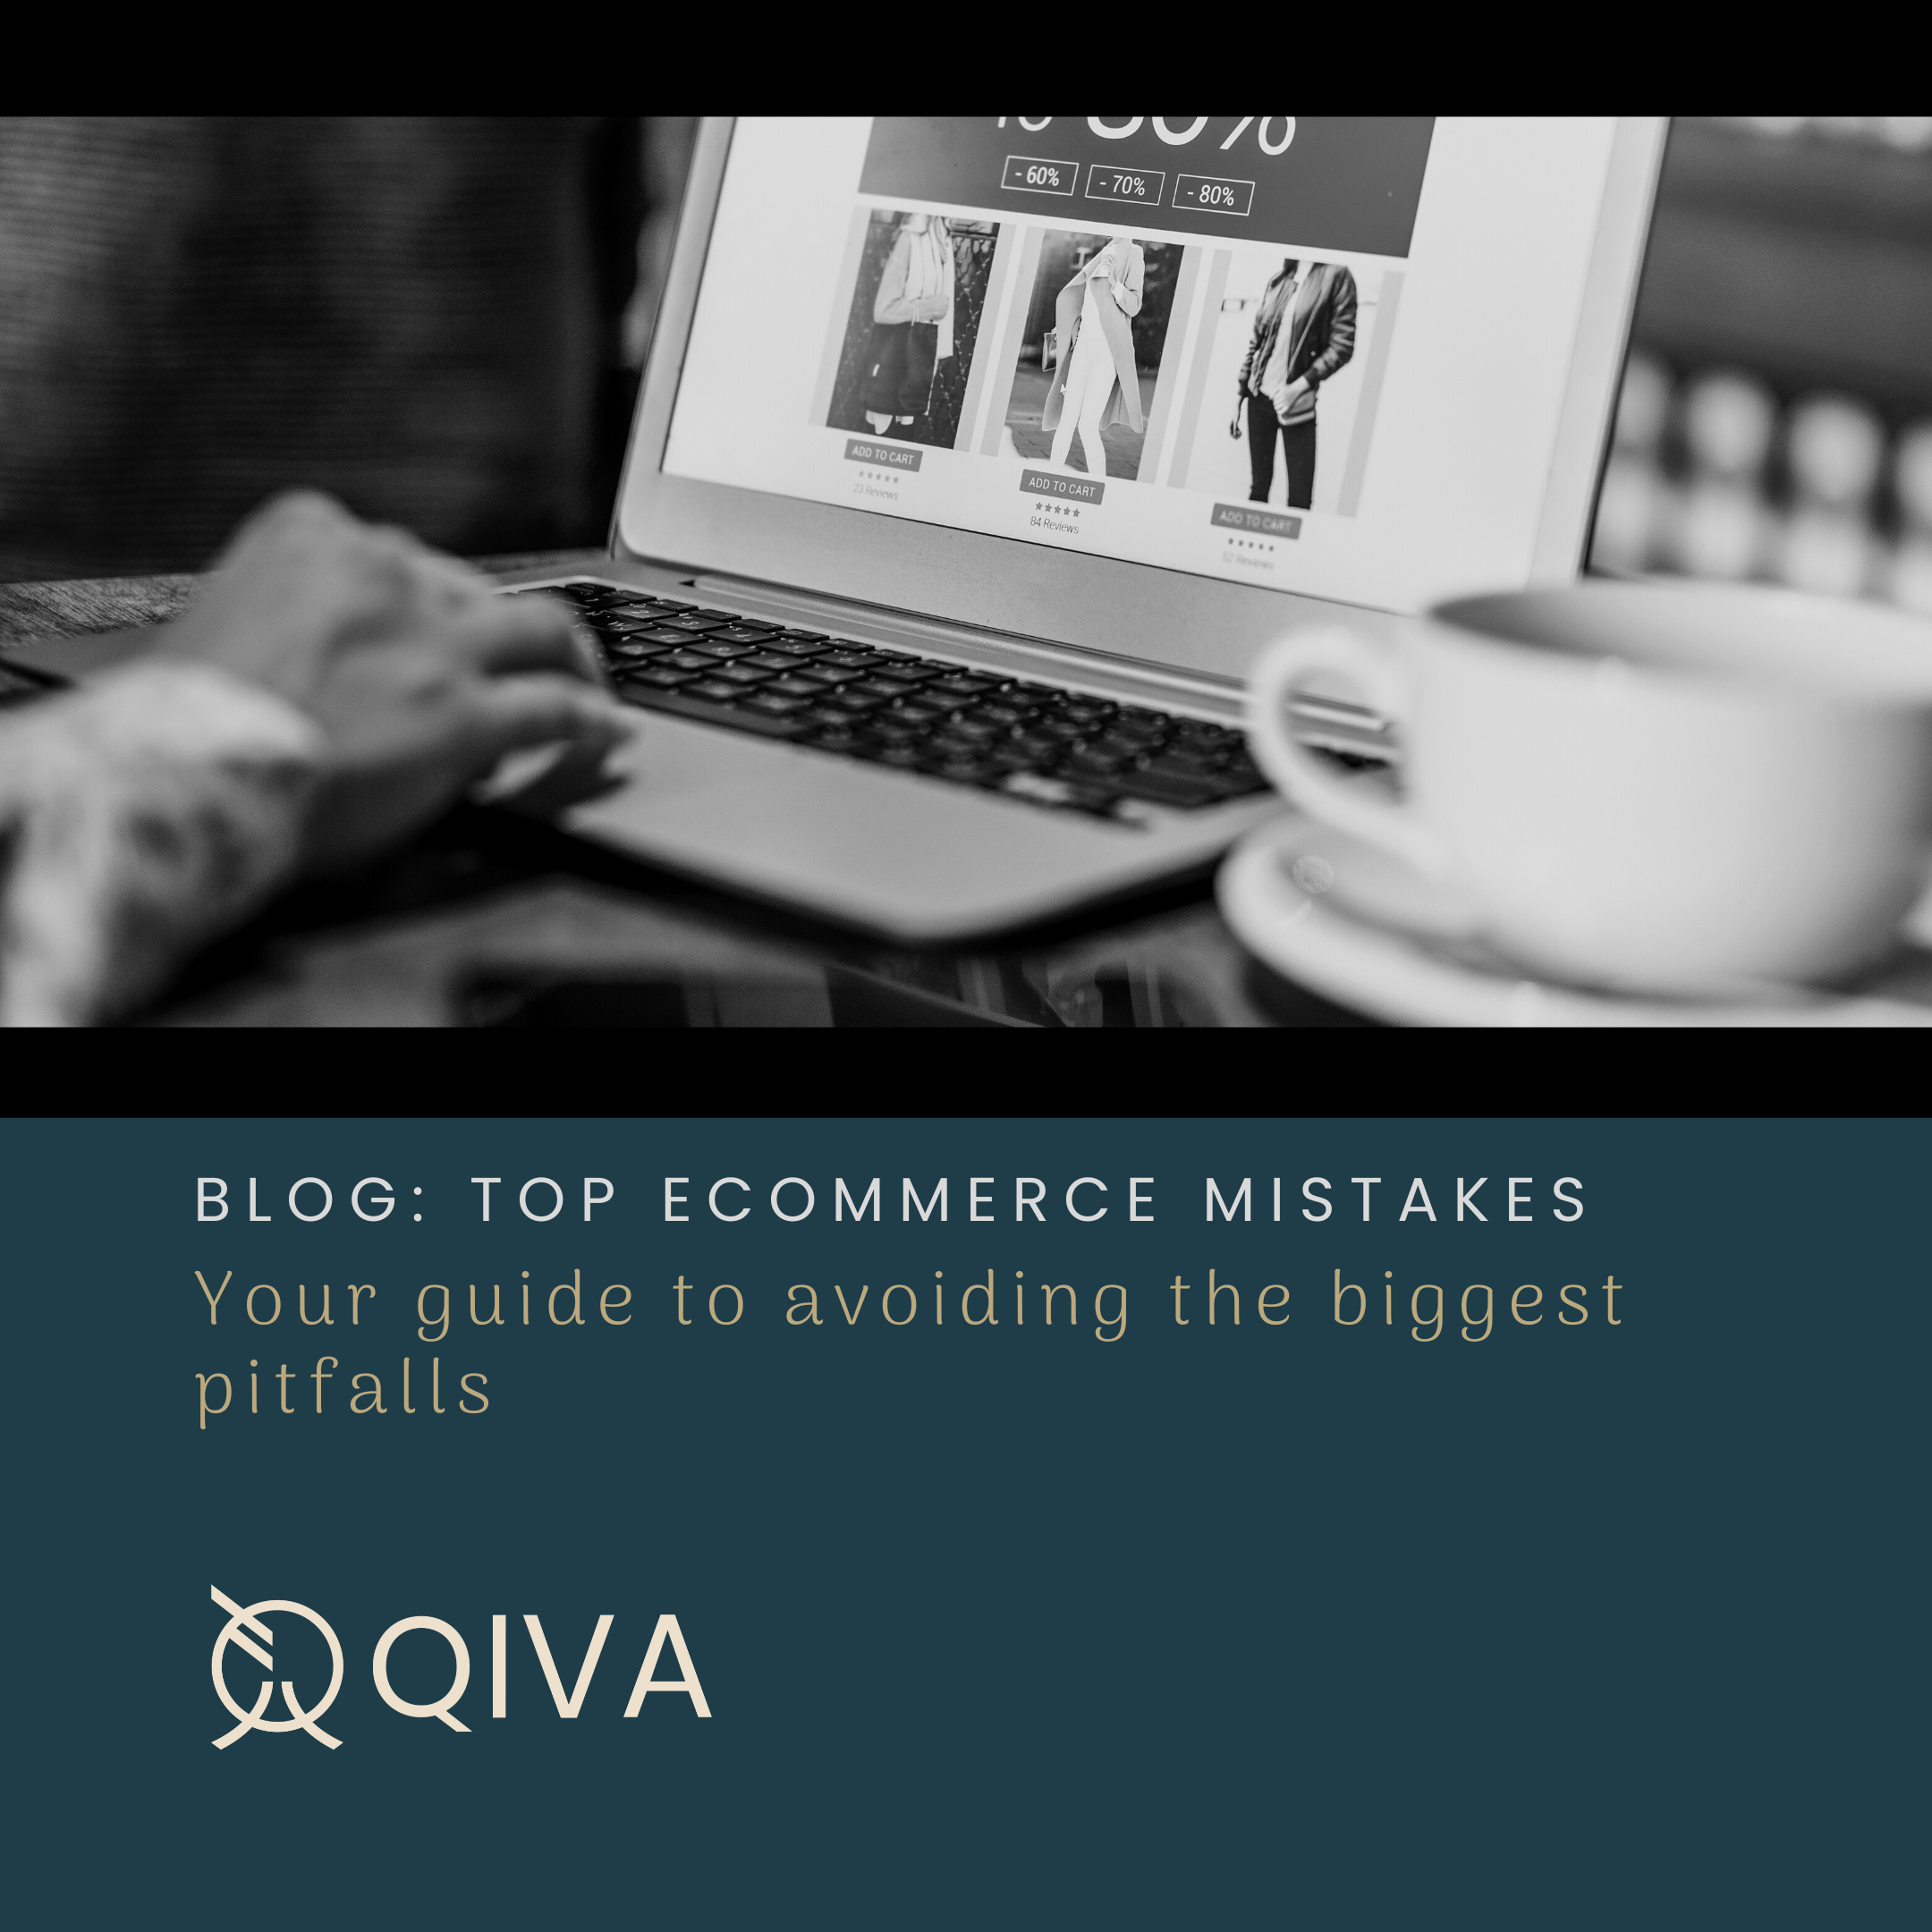 Top eCommerce mistakes: your guide to avoiding the biggest pitfalls